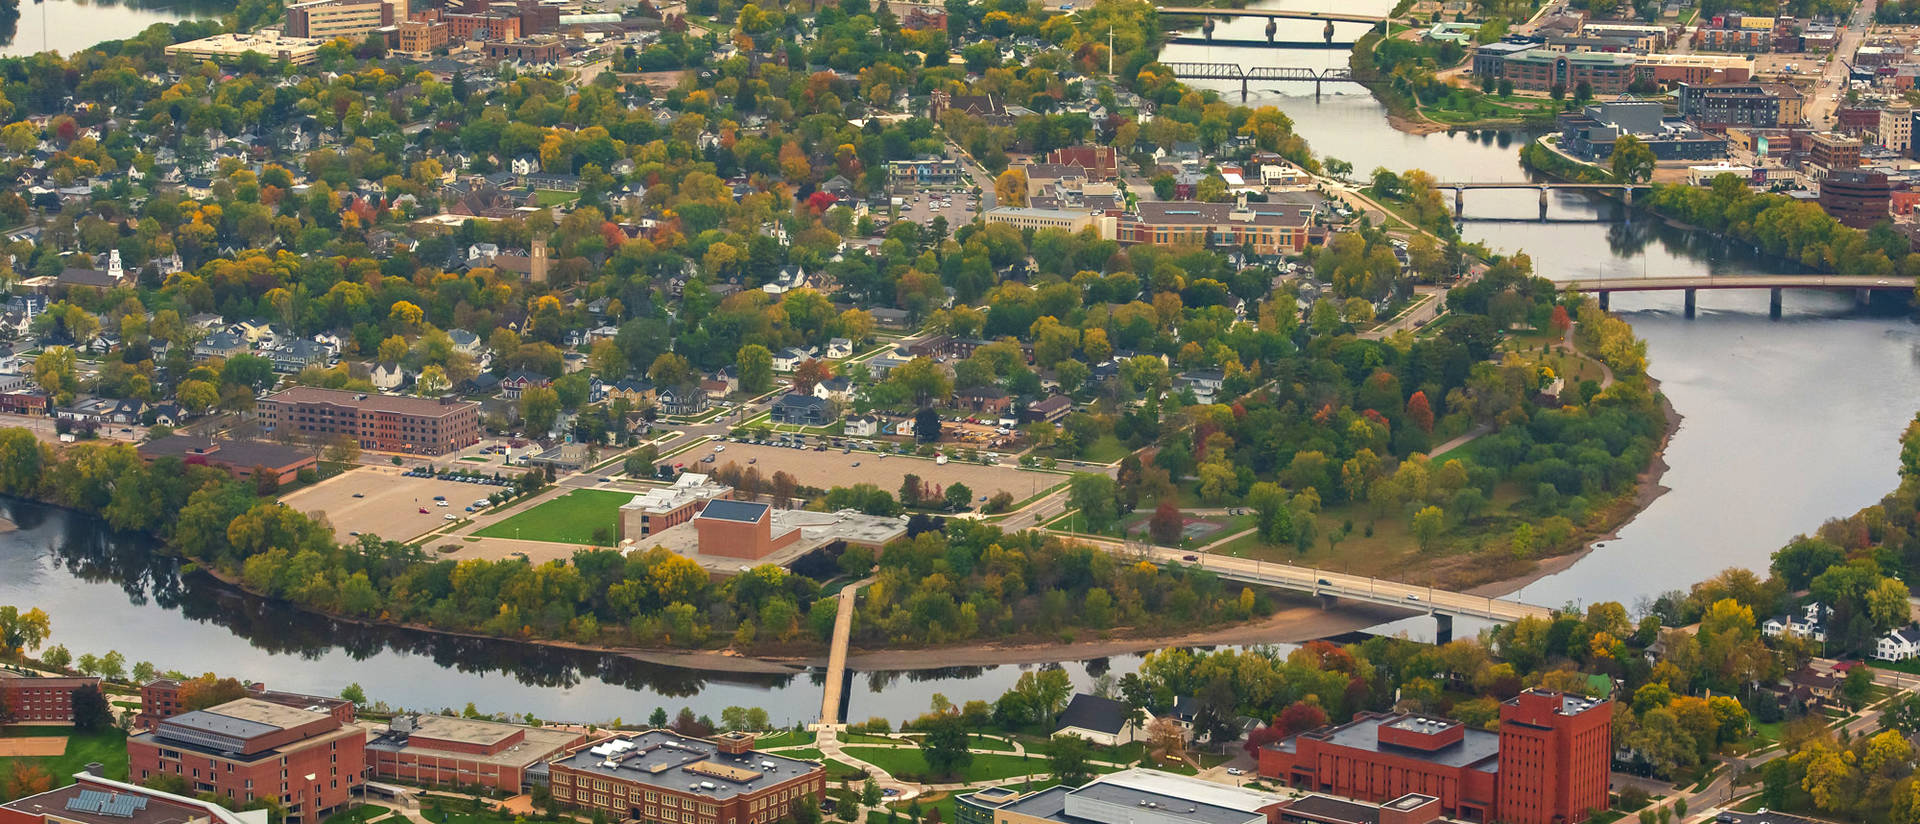 city and campus from air